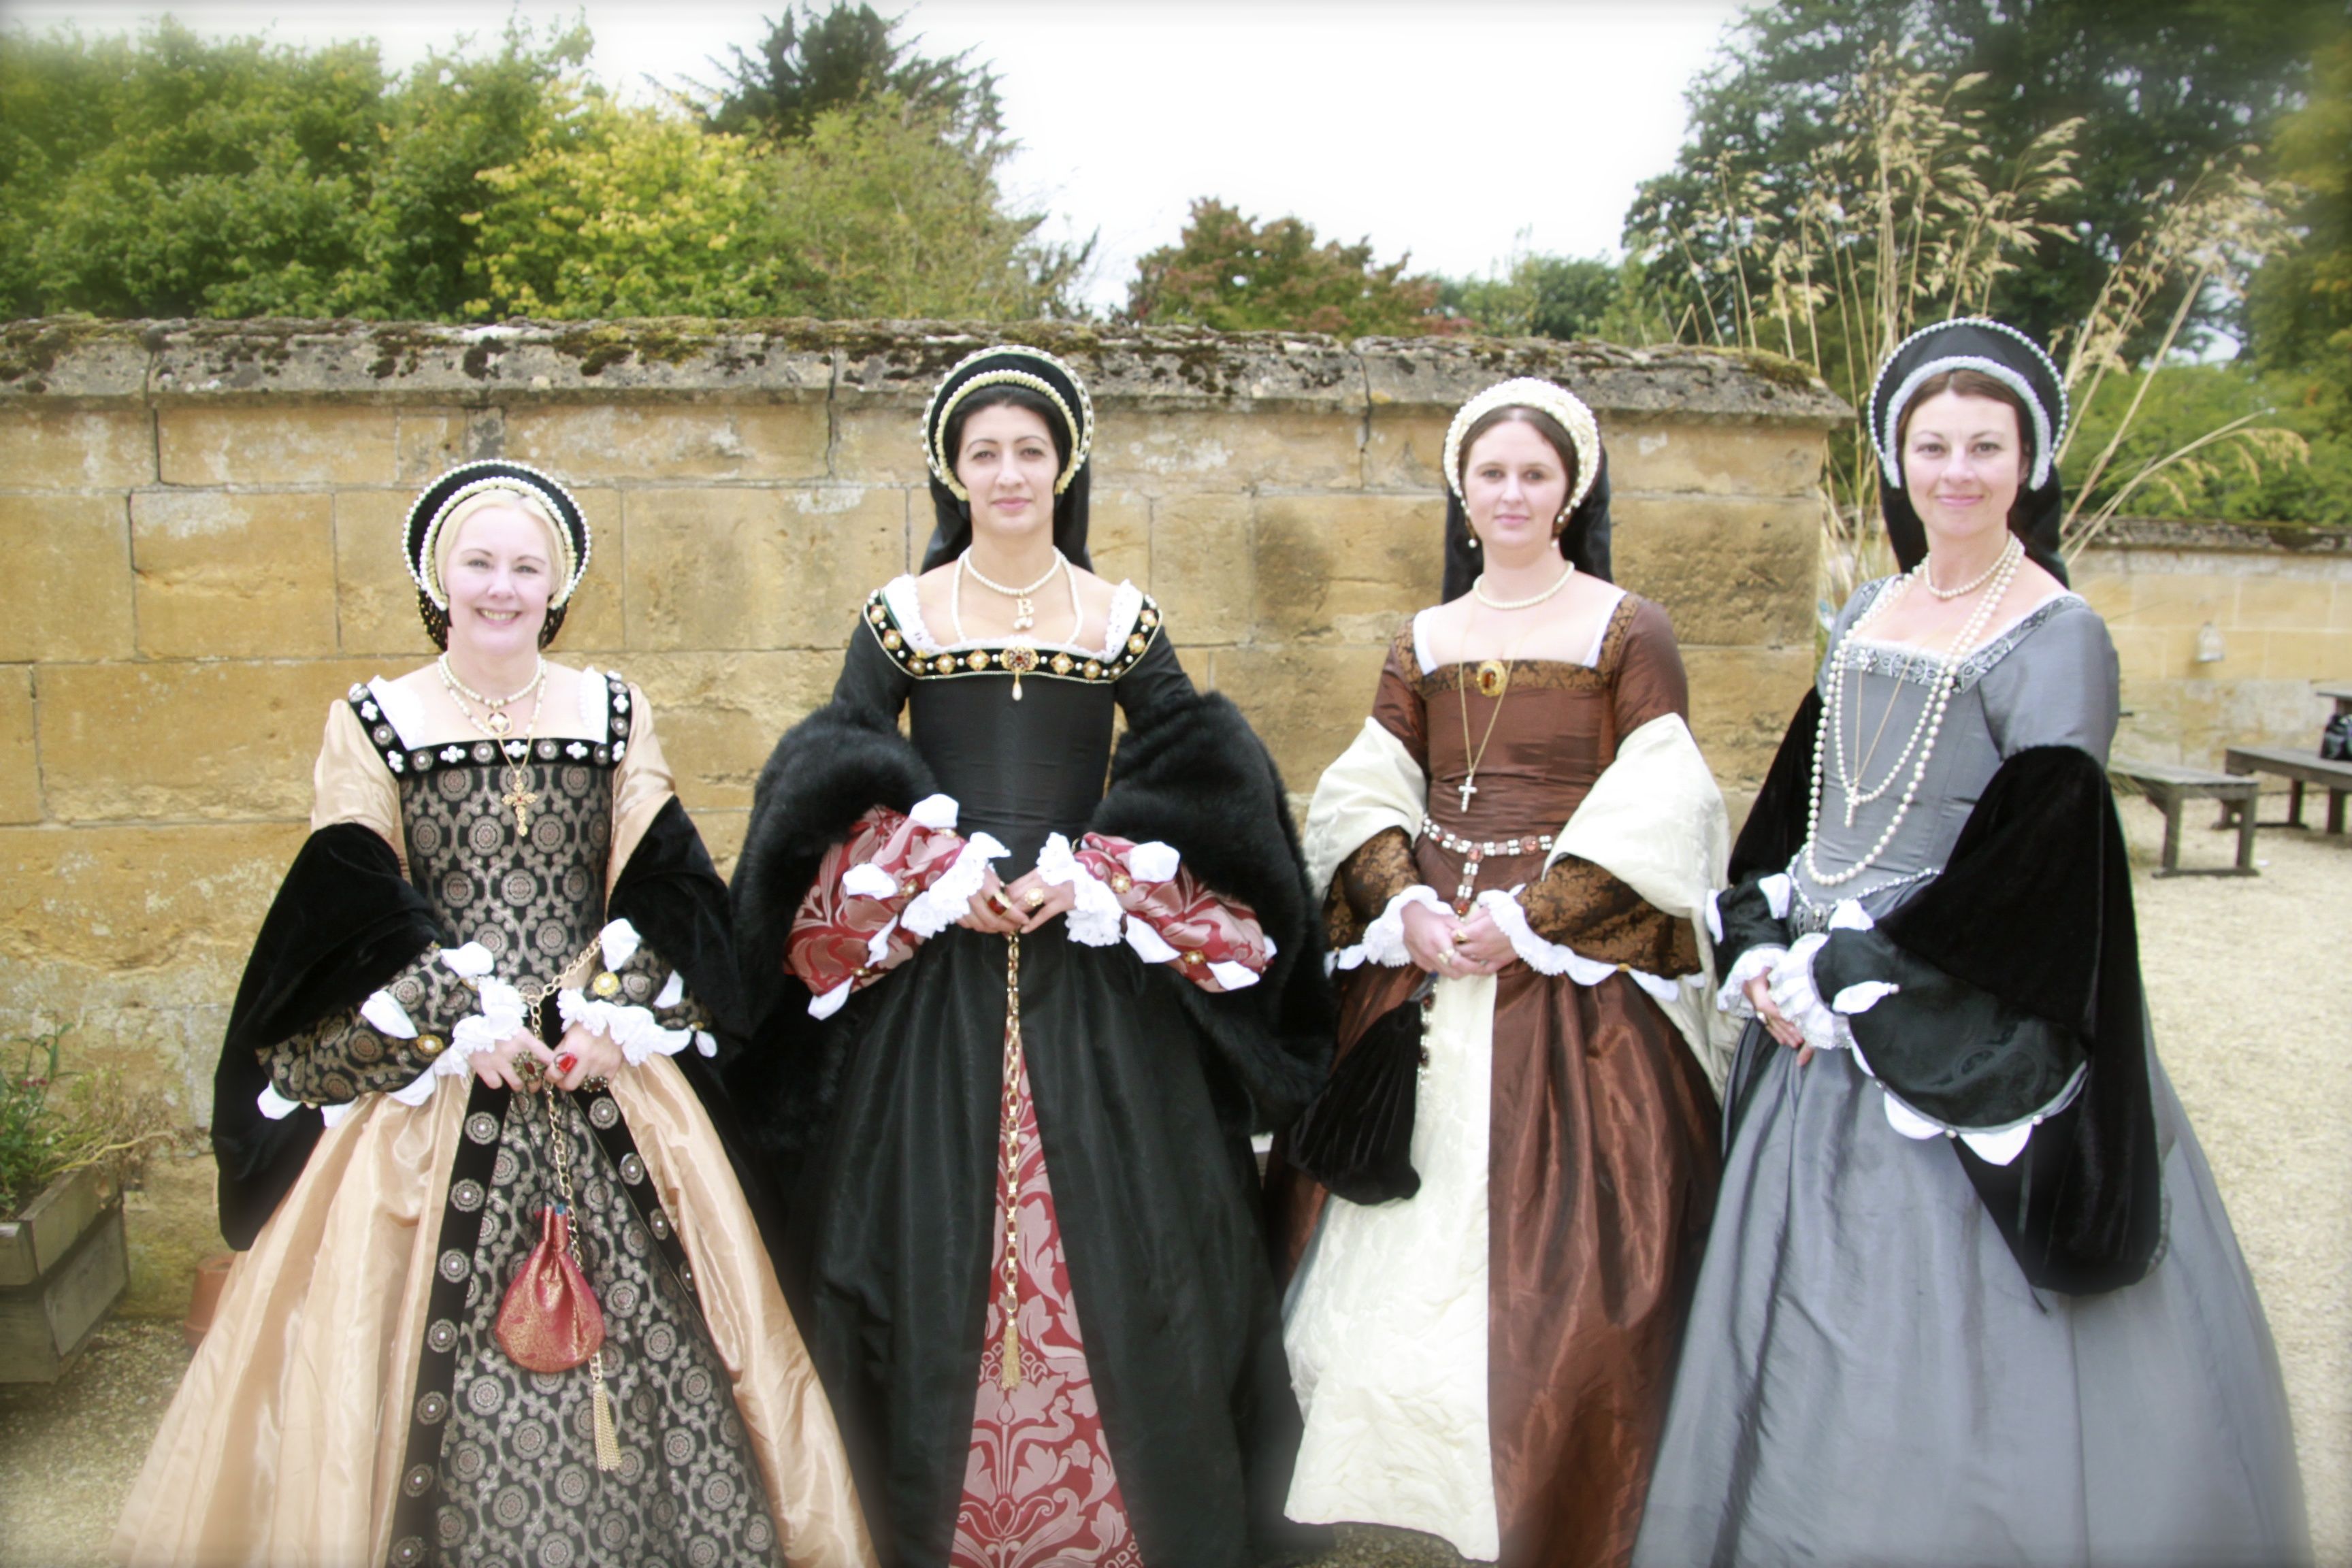 What Did A Noble Tudor Lady Wear?